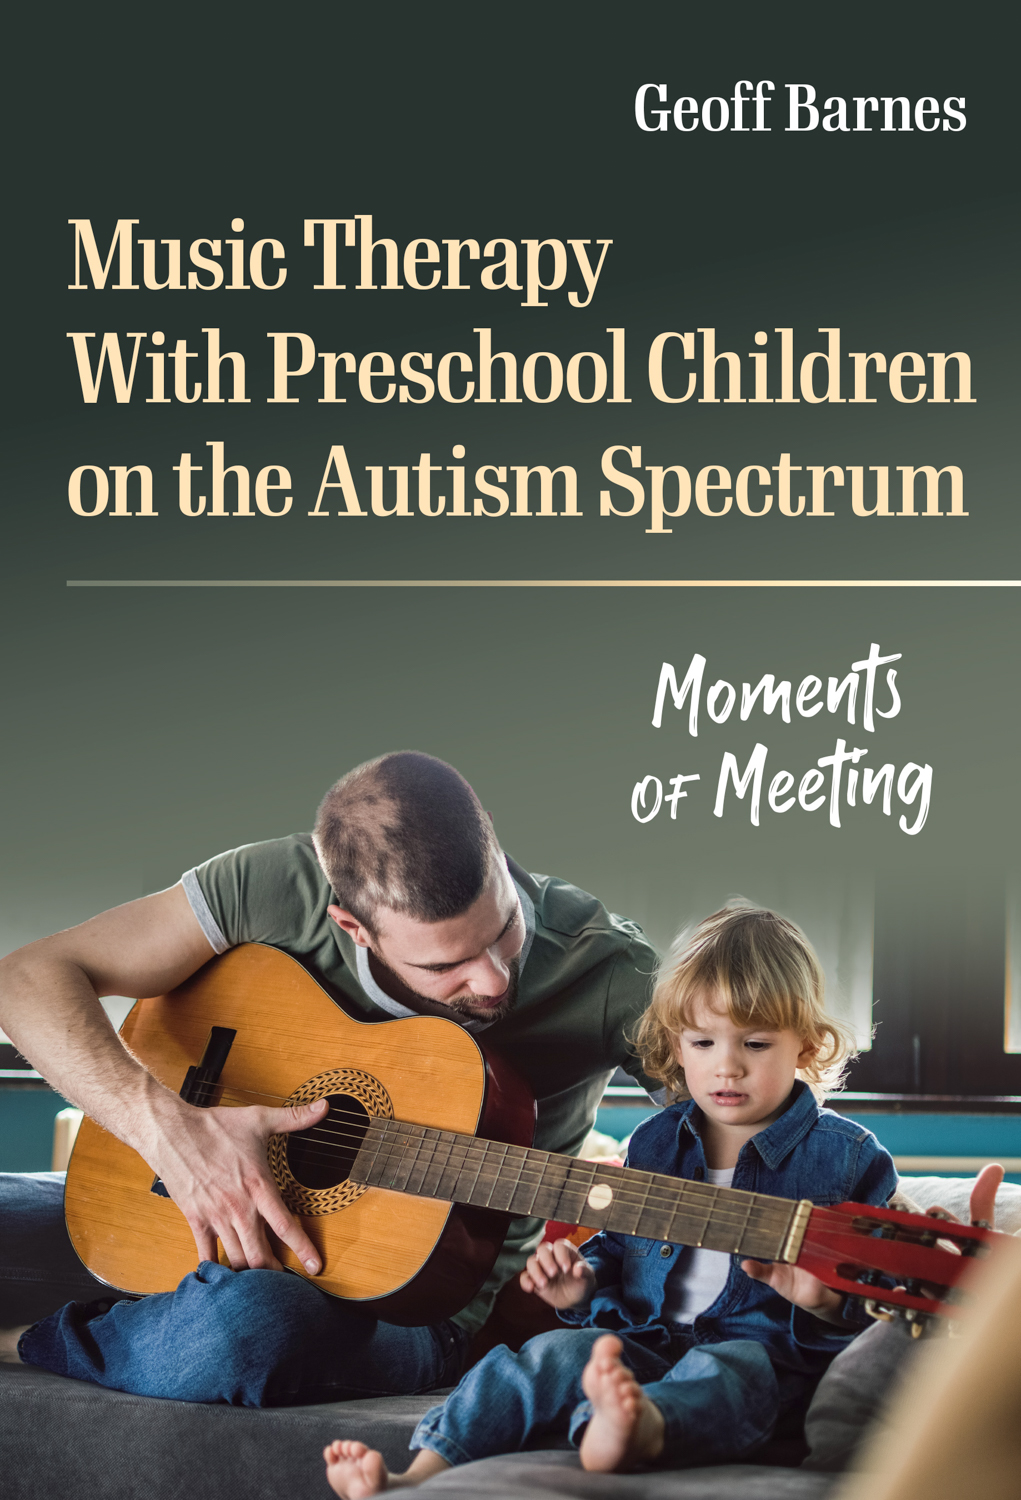 Music Therapy With Preschool Children on the Autism Spectrum book cover - shows a man playing a guitar with a young child.